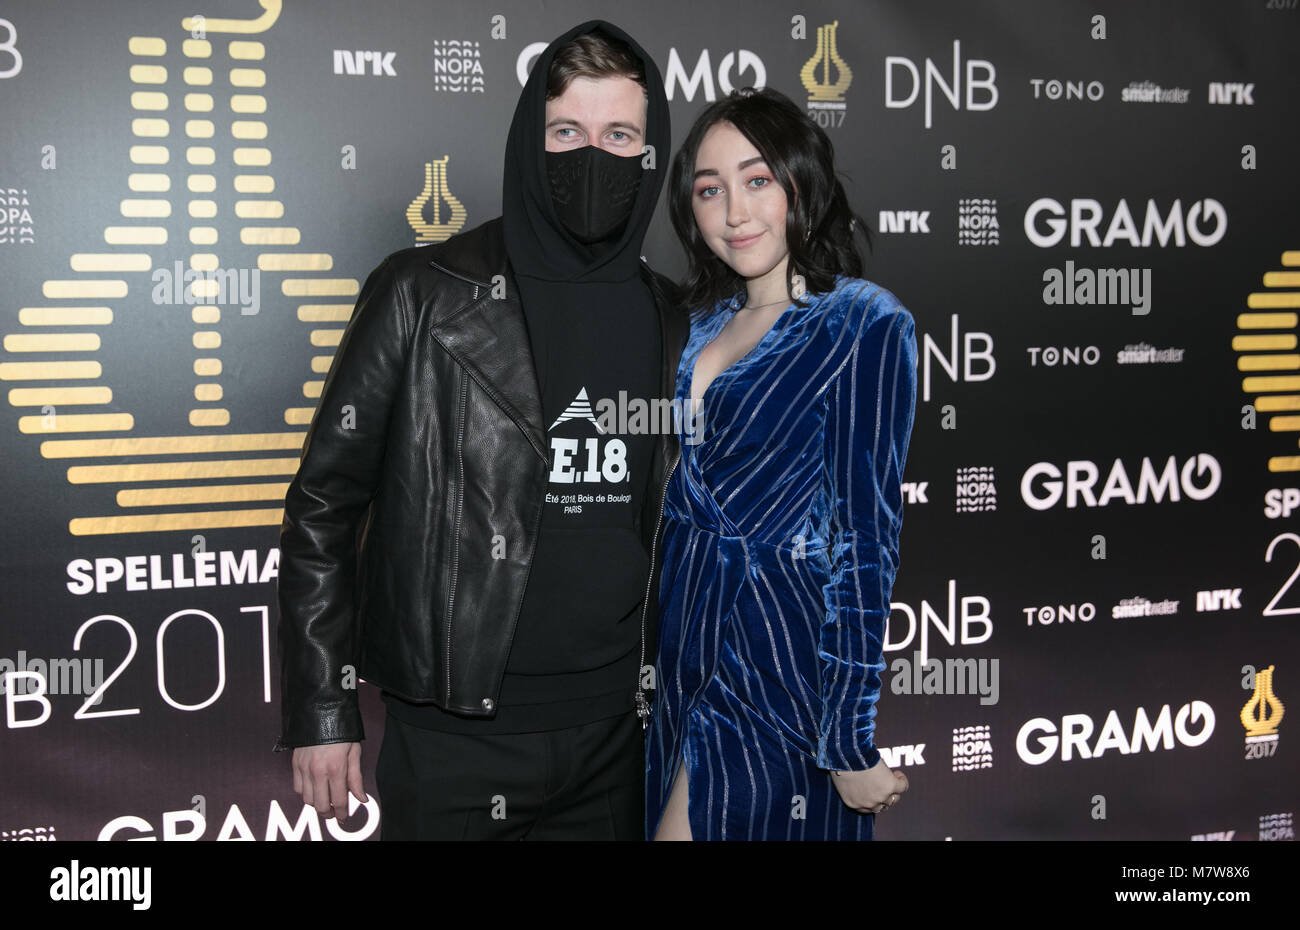 Norway, Oslo - February 25, 2018. The Norwegian record producer Alan Walker  and American singer Noah Cyrus are seen at the red carpet at the Norwegian  Grammy Awards, Spellemannprisen 2017, in Oslo. (